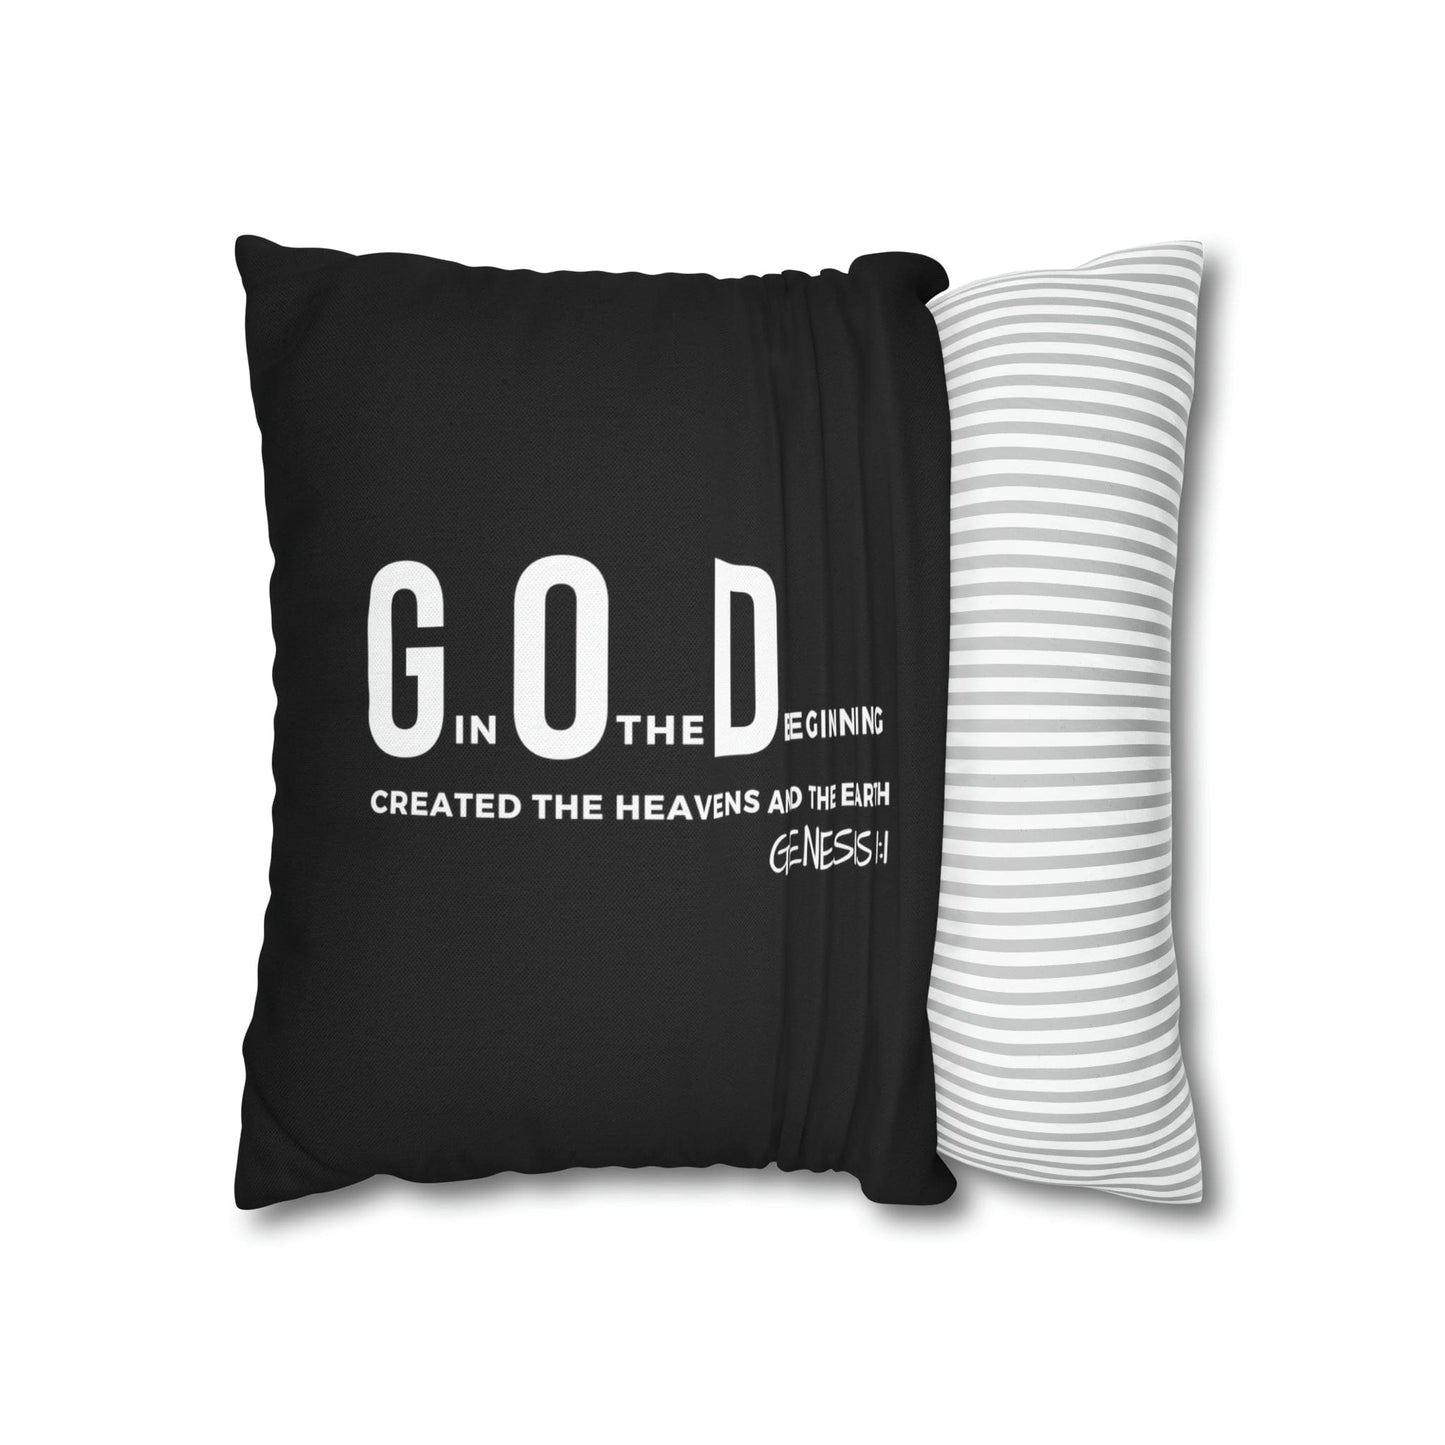 Decorative Throw Pillow Cover - Set Of 2, God In The Beginning Created The Heavens And The Earth - Scripture Verse-16